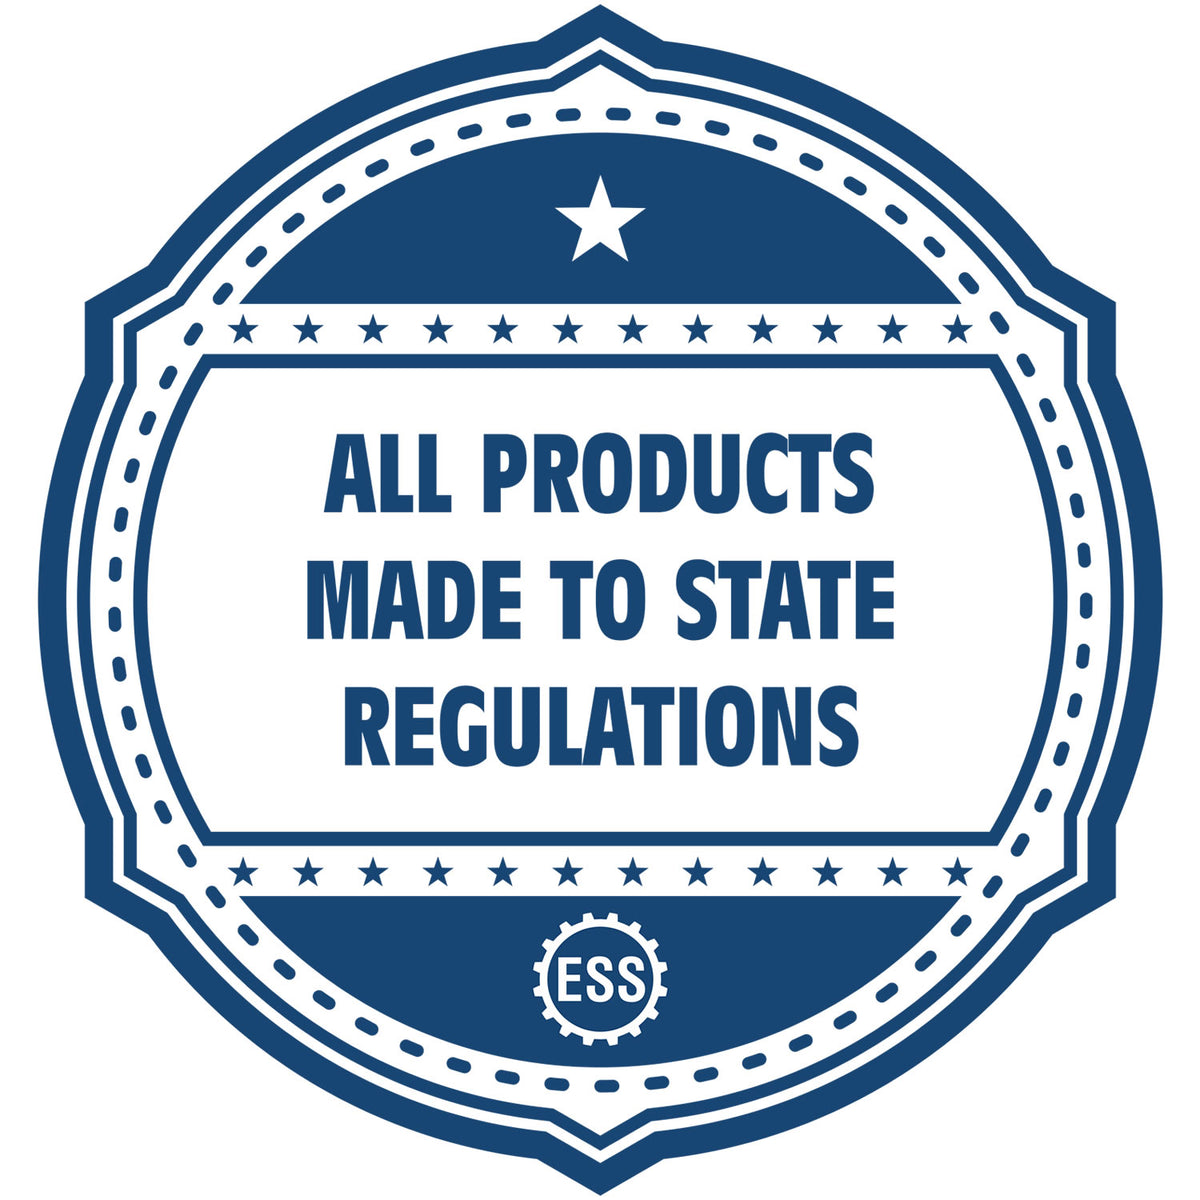 An icon or badge element for the Digital Texas PE Stamp and Electronic Seal for Texas Engineer showing that this product is made in compliance with state regulations.